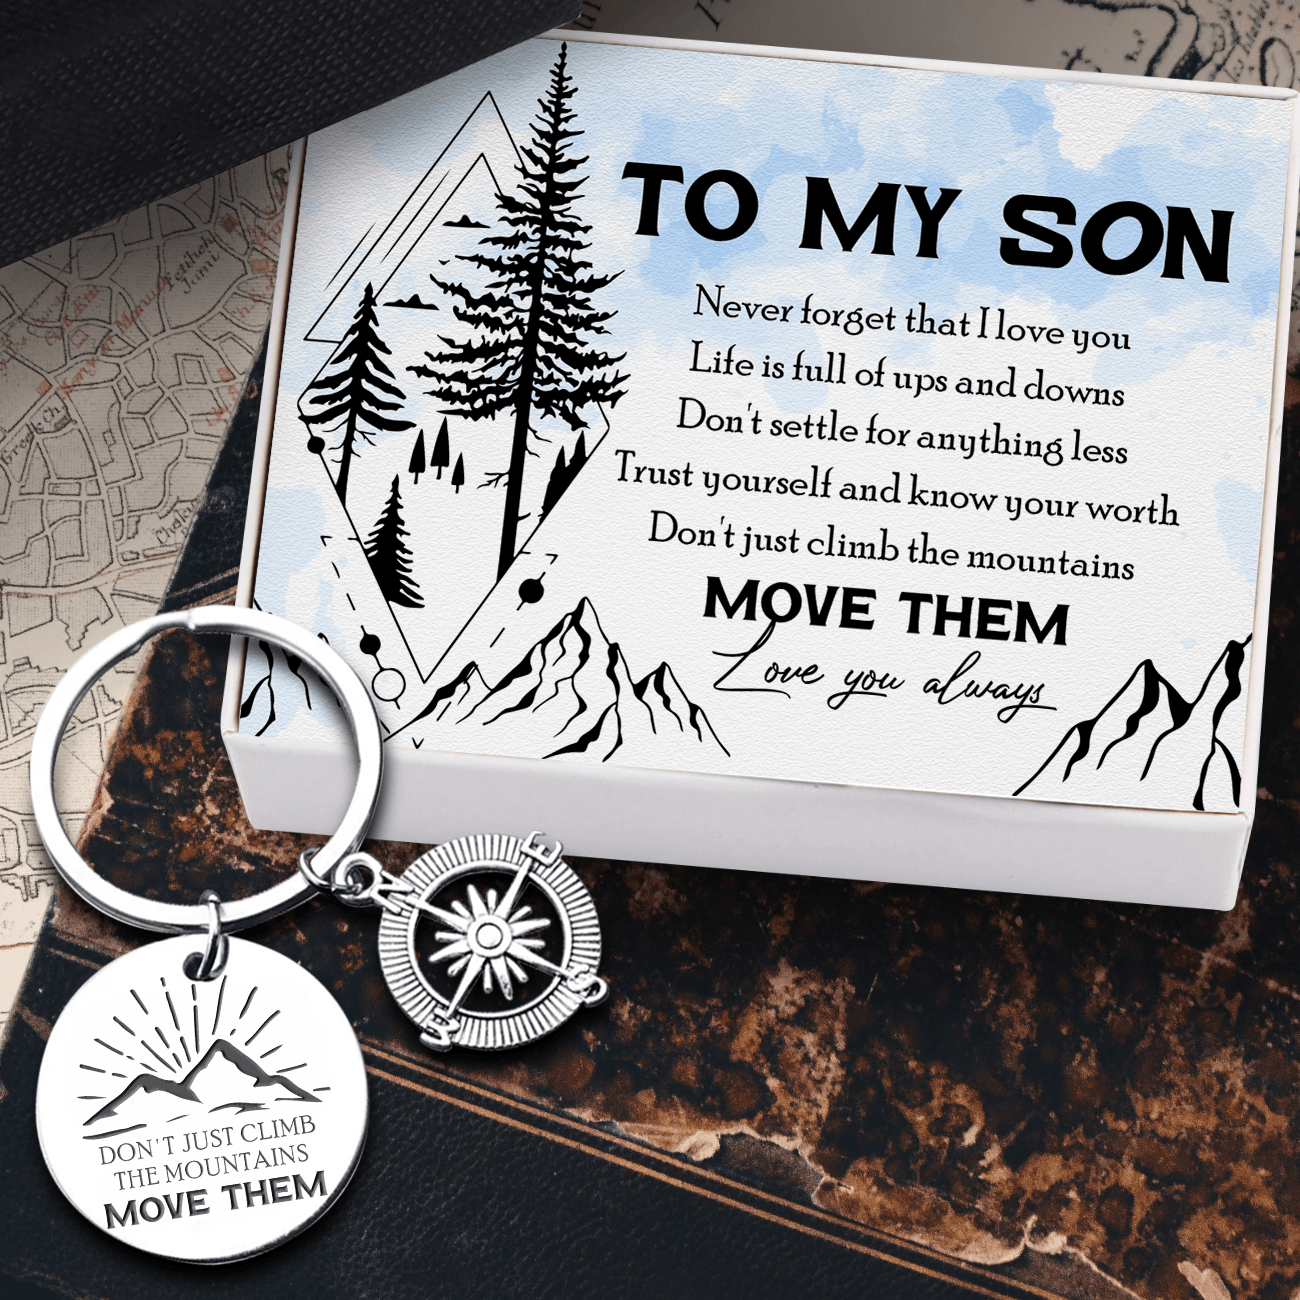 Compass Keychain - Hiking - To My Son - Never Forget That I Love You - Augkw16011 - Gifts Holder